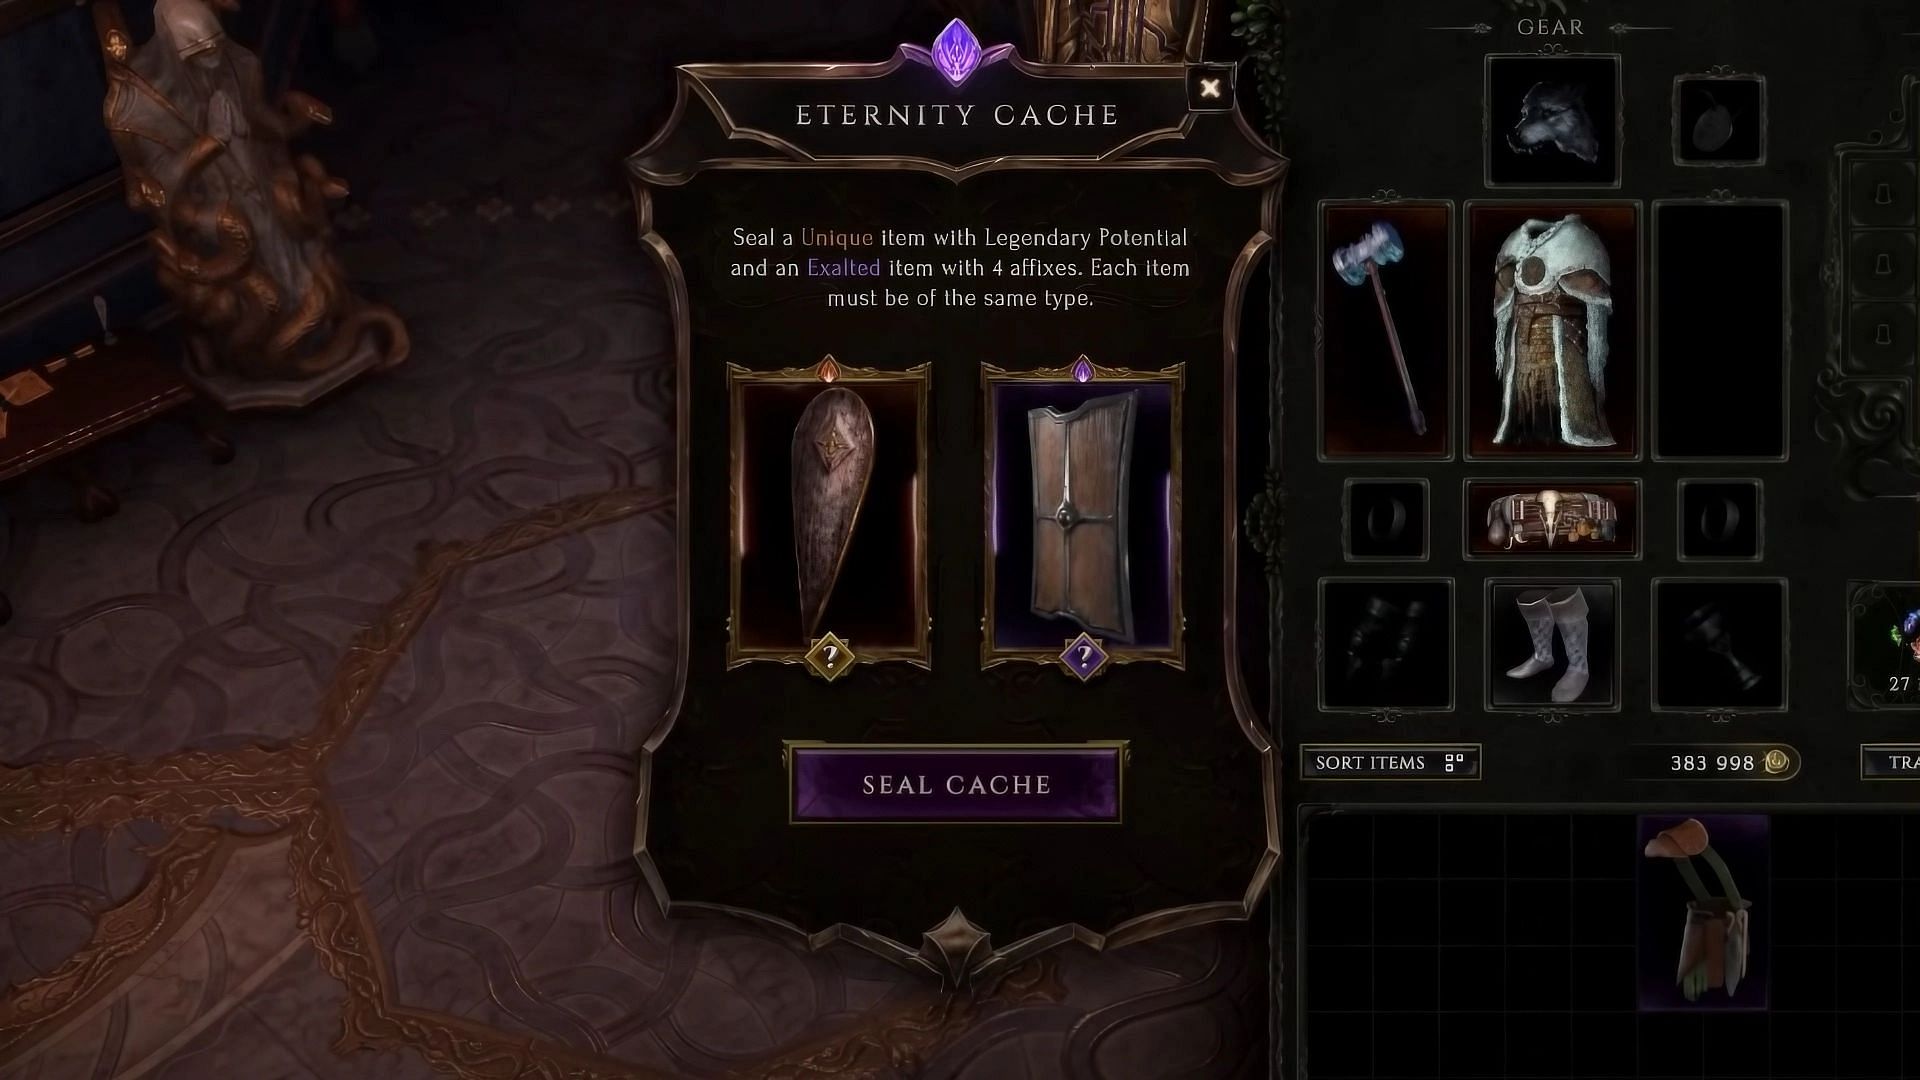 Stack the necessary resources in Eternity Cache to craft the Legendary item (Image via Eleventh Hour Games)